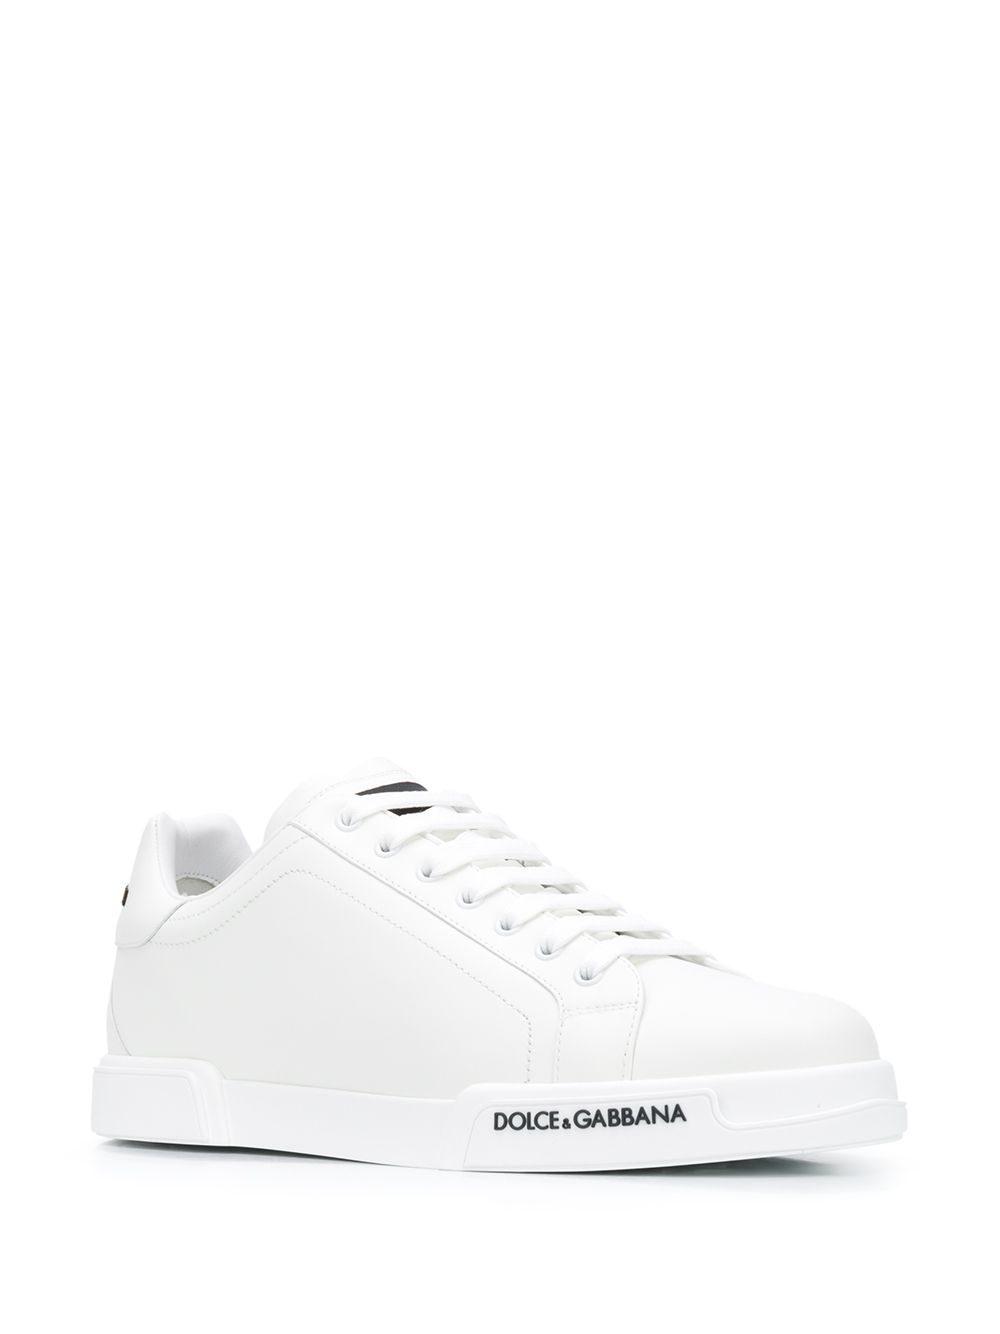 Total white sneakers